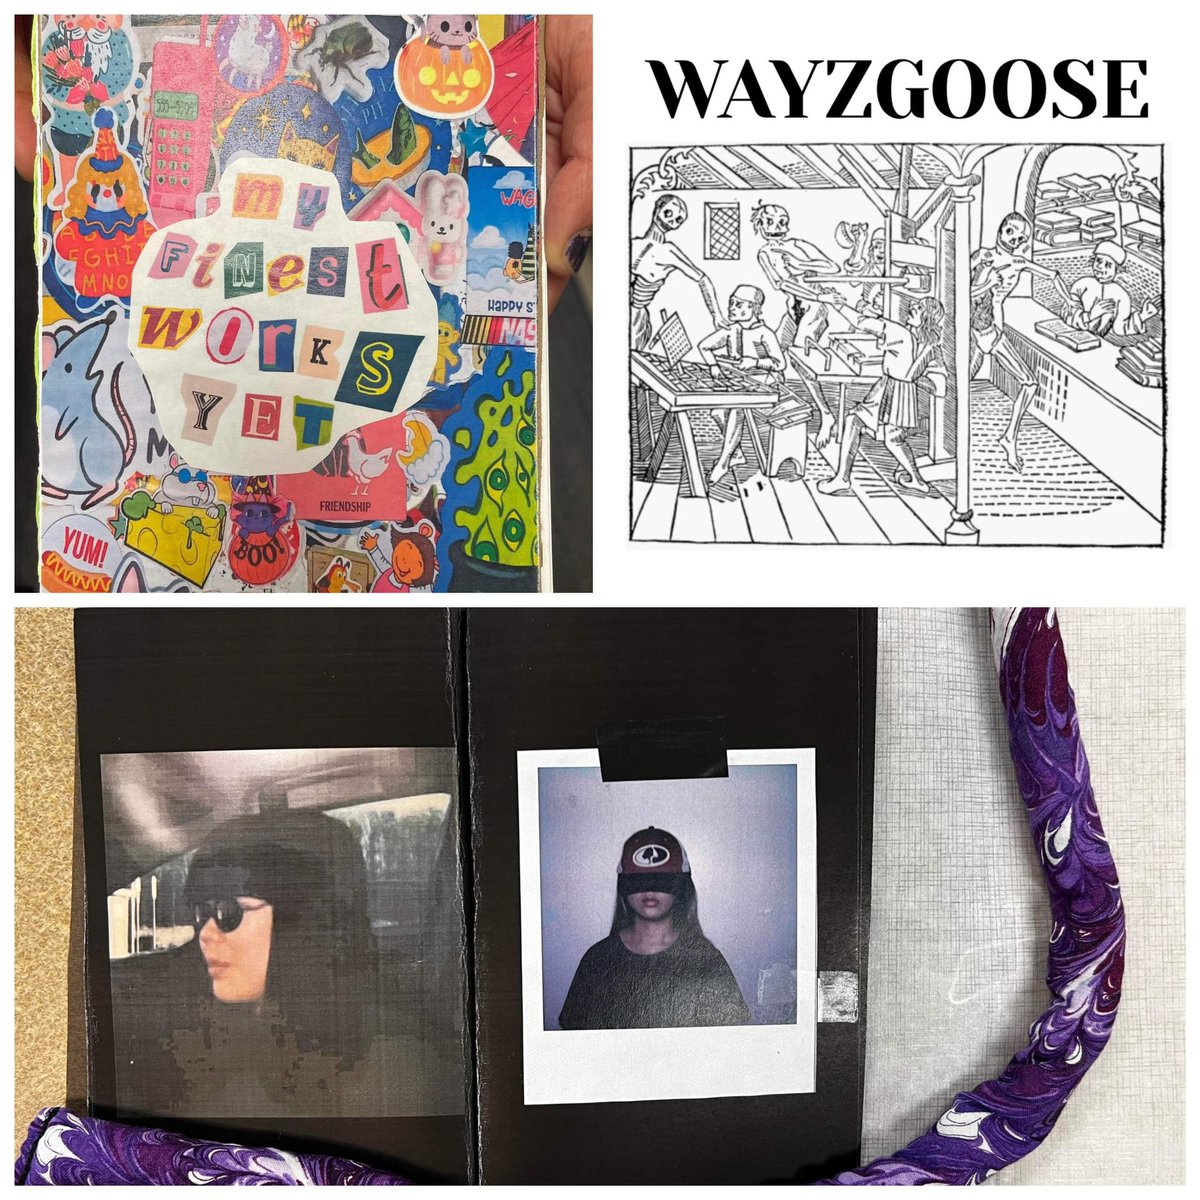 BookLab invites you to our semesterly Wayzgoose in honor of the work of our interns, Jasmine Franco and Cassandra Rochmis! Please stop by BookLab next Tuesday, May 14 between 12 and 1pm for an exhibition of book arts produced by our incredible interns.